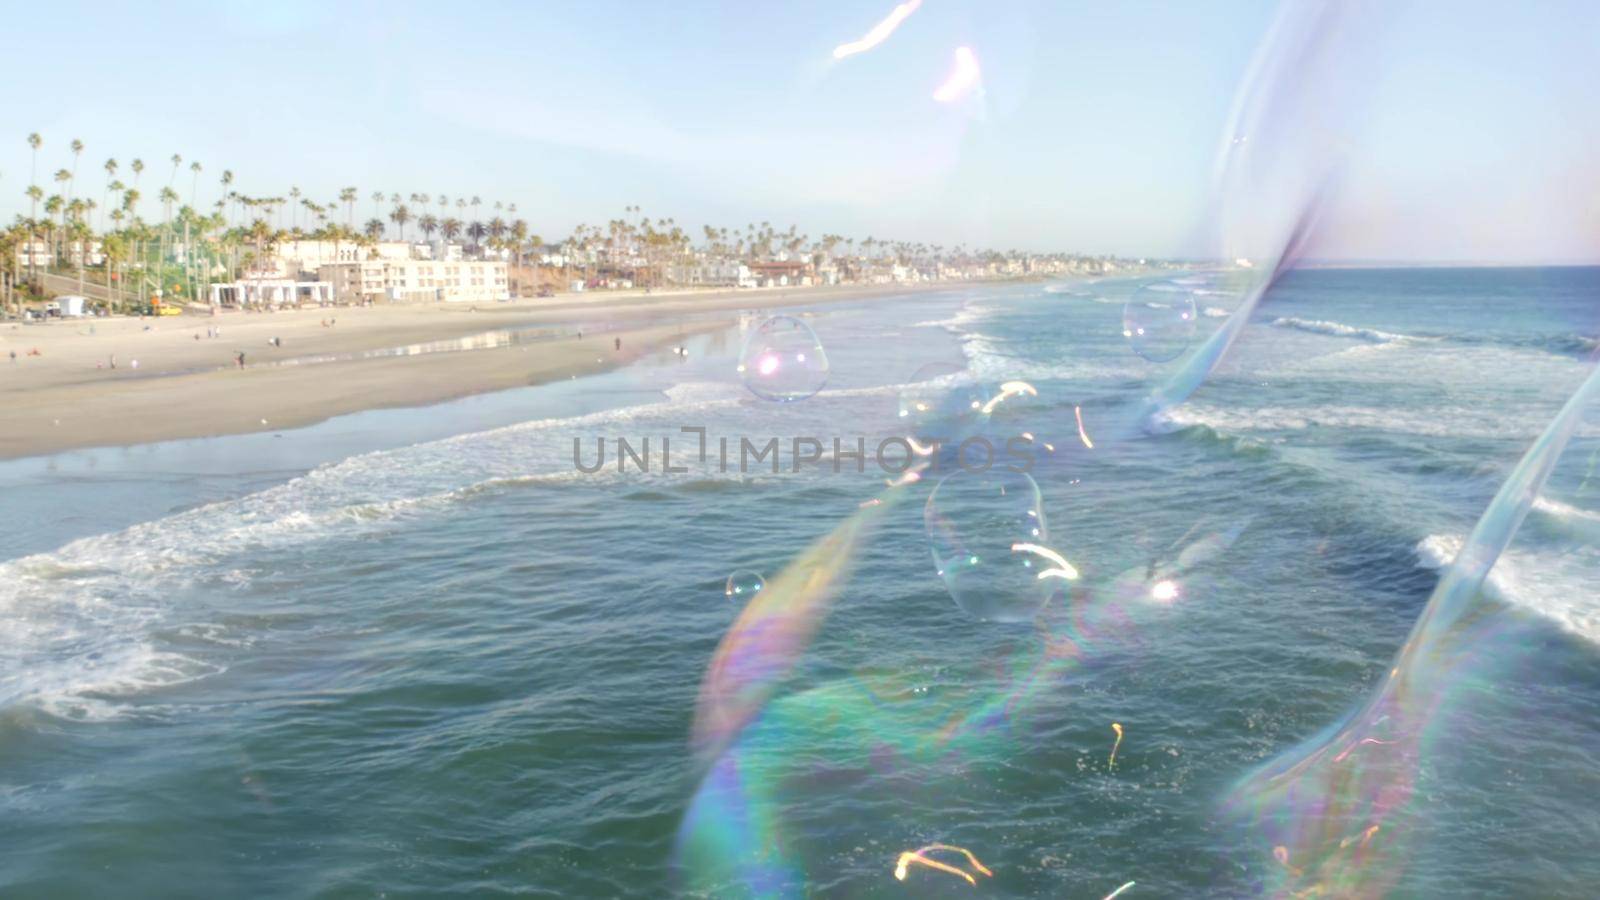 Blowing soap bubbles on ocean pier in California, blurred summertime background. Creative romantic metaphor, concept of dreaming happiness and magic. Abstract symbol of childhood, fantasy, freedom.